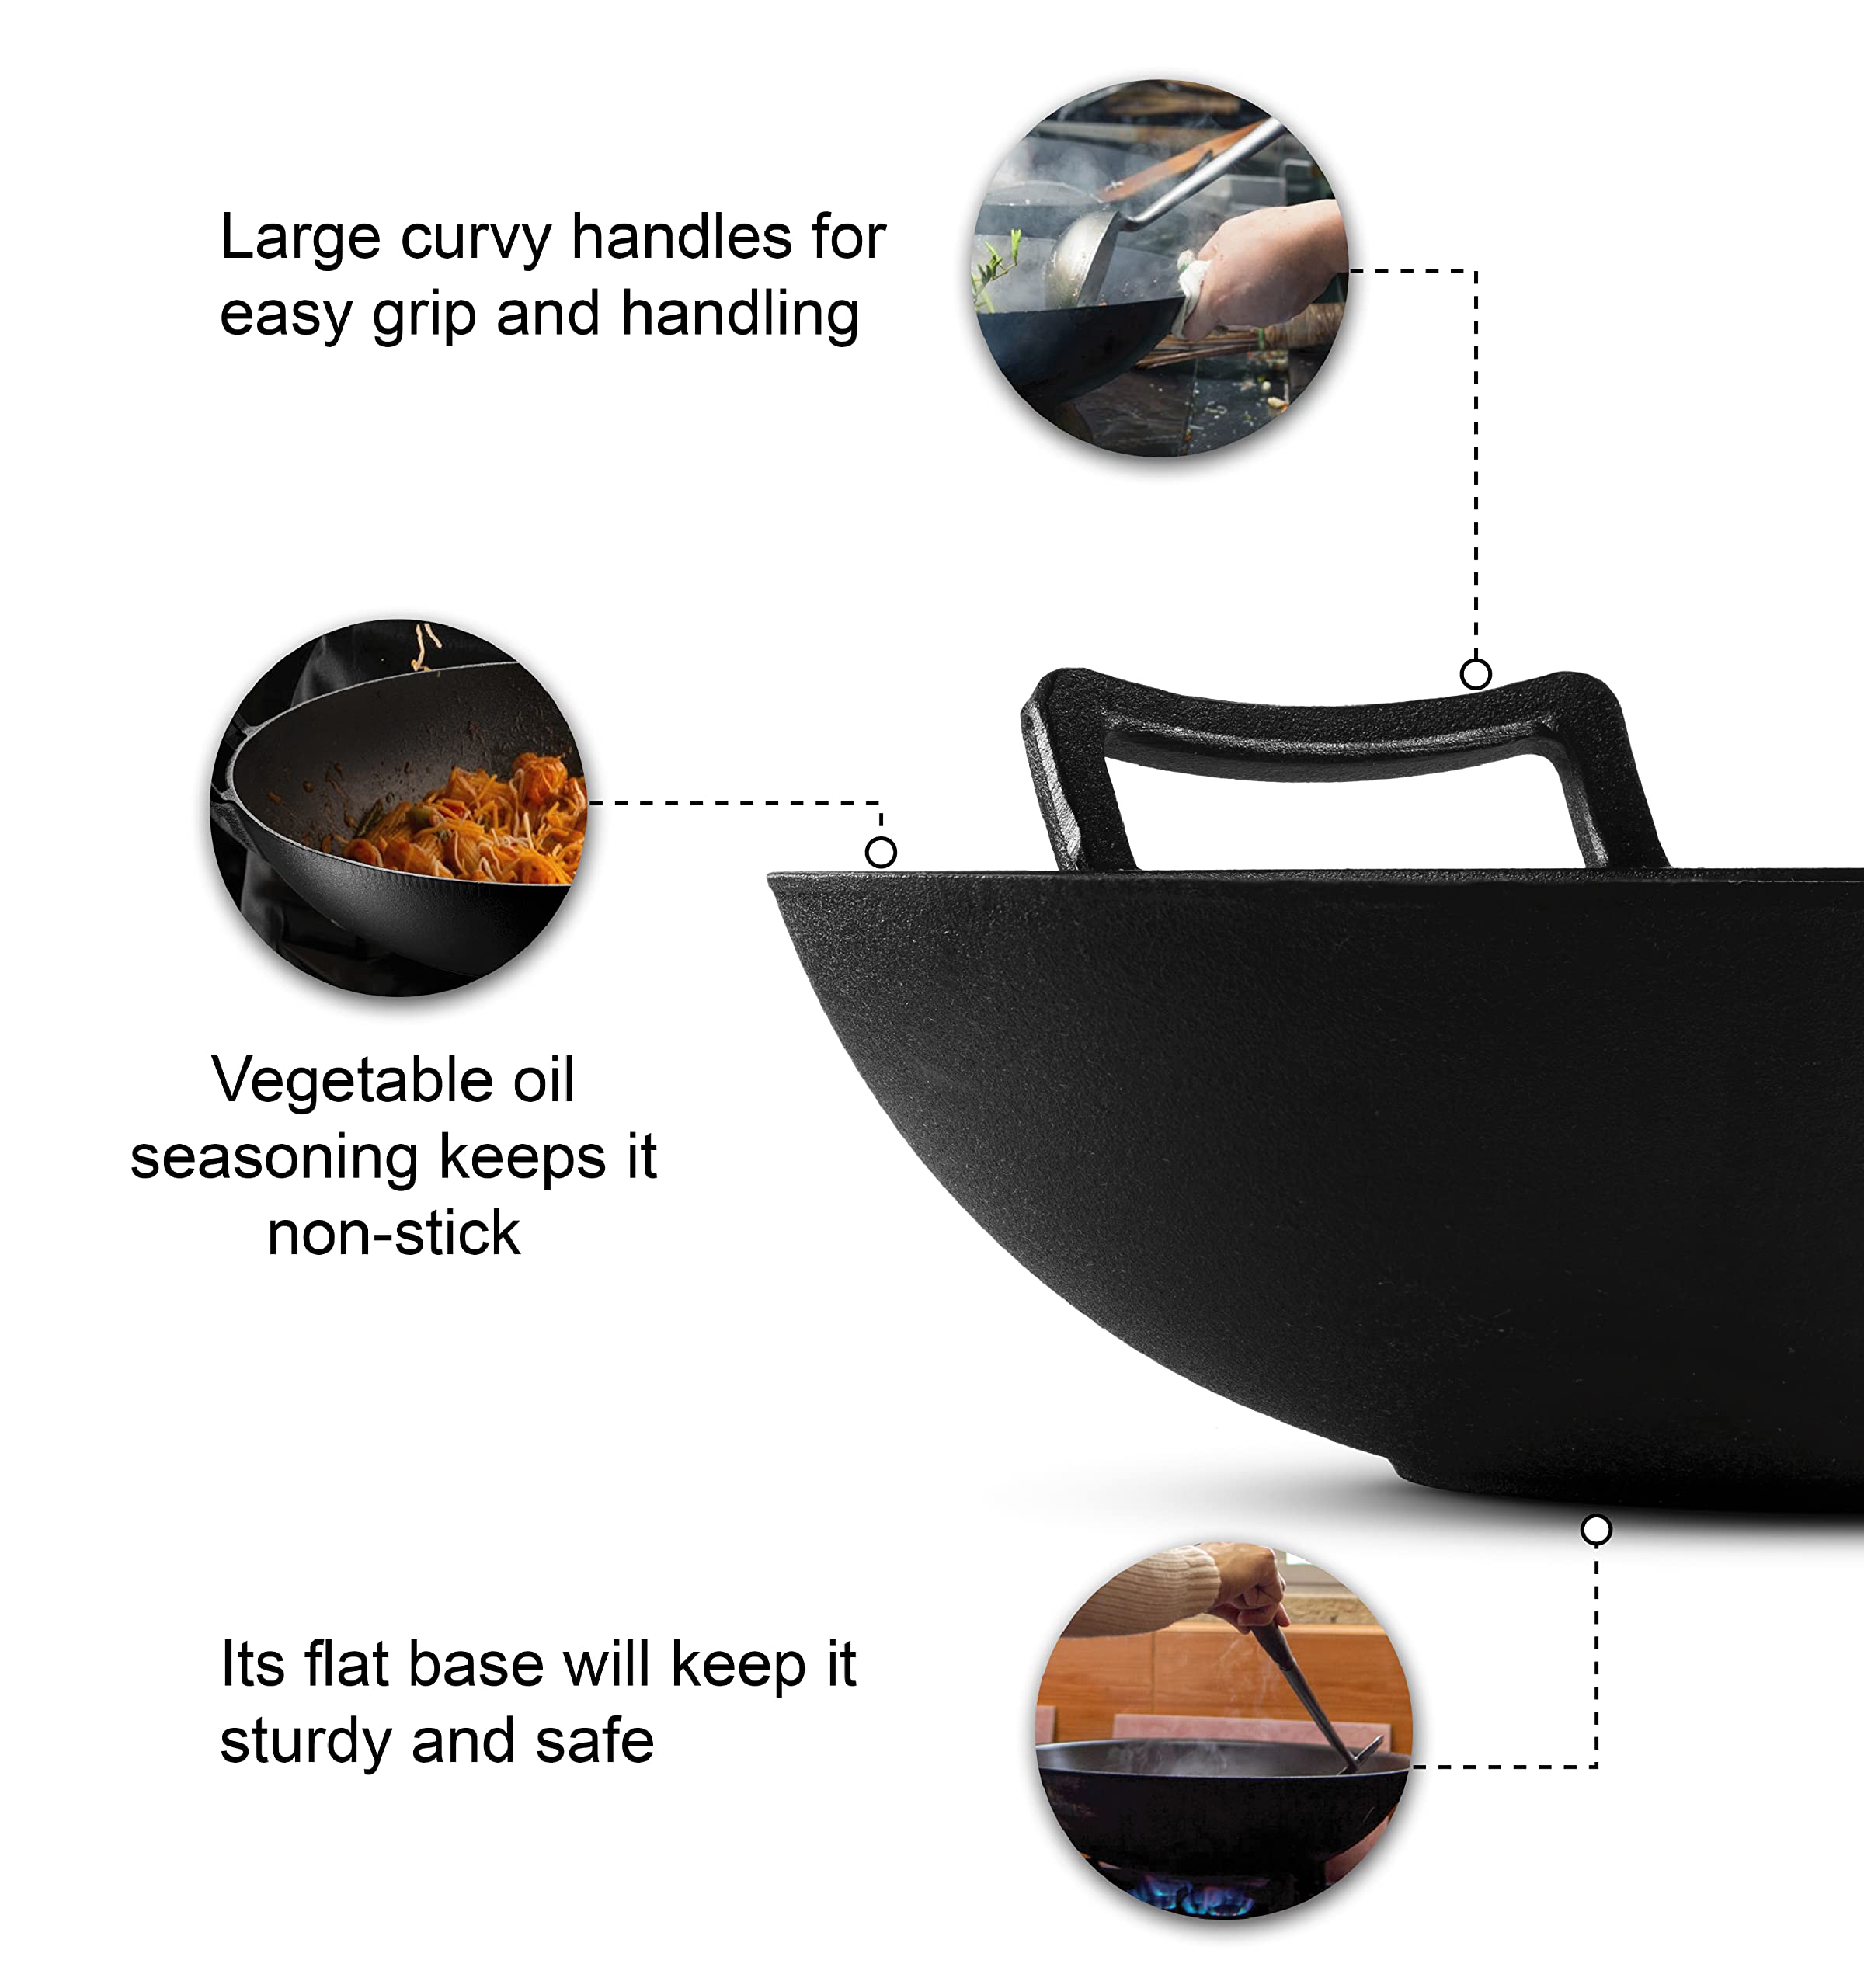 Klee Pre-Seasoned Cast Iron Wok Pan with Wood Wok Lid and Handles - 14" Large Wok Pan with Flat Base and Non-Stick Surface for Deep Frying, Stir-Frying, Grilling, Steaming - Stovetop and Oven Safe